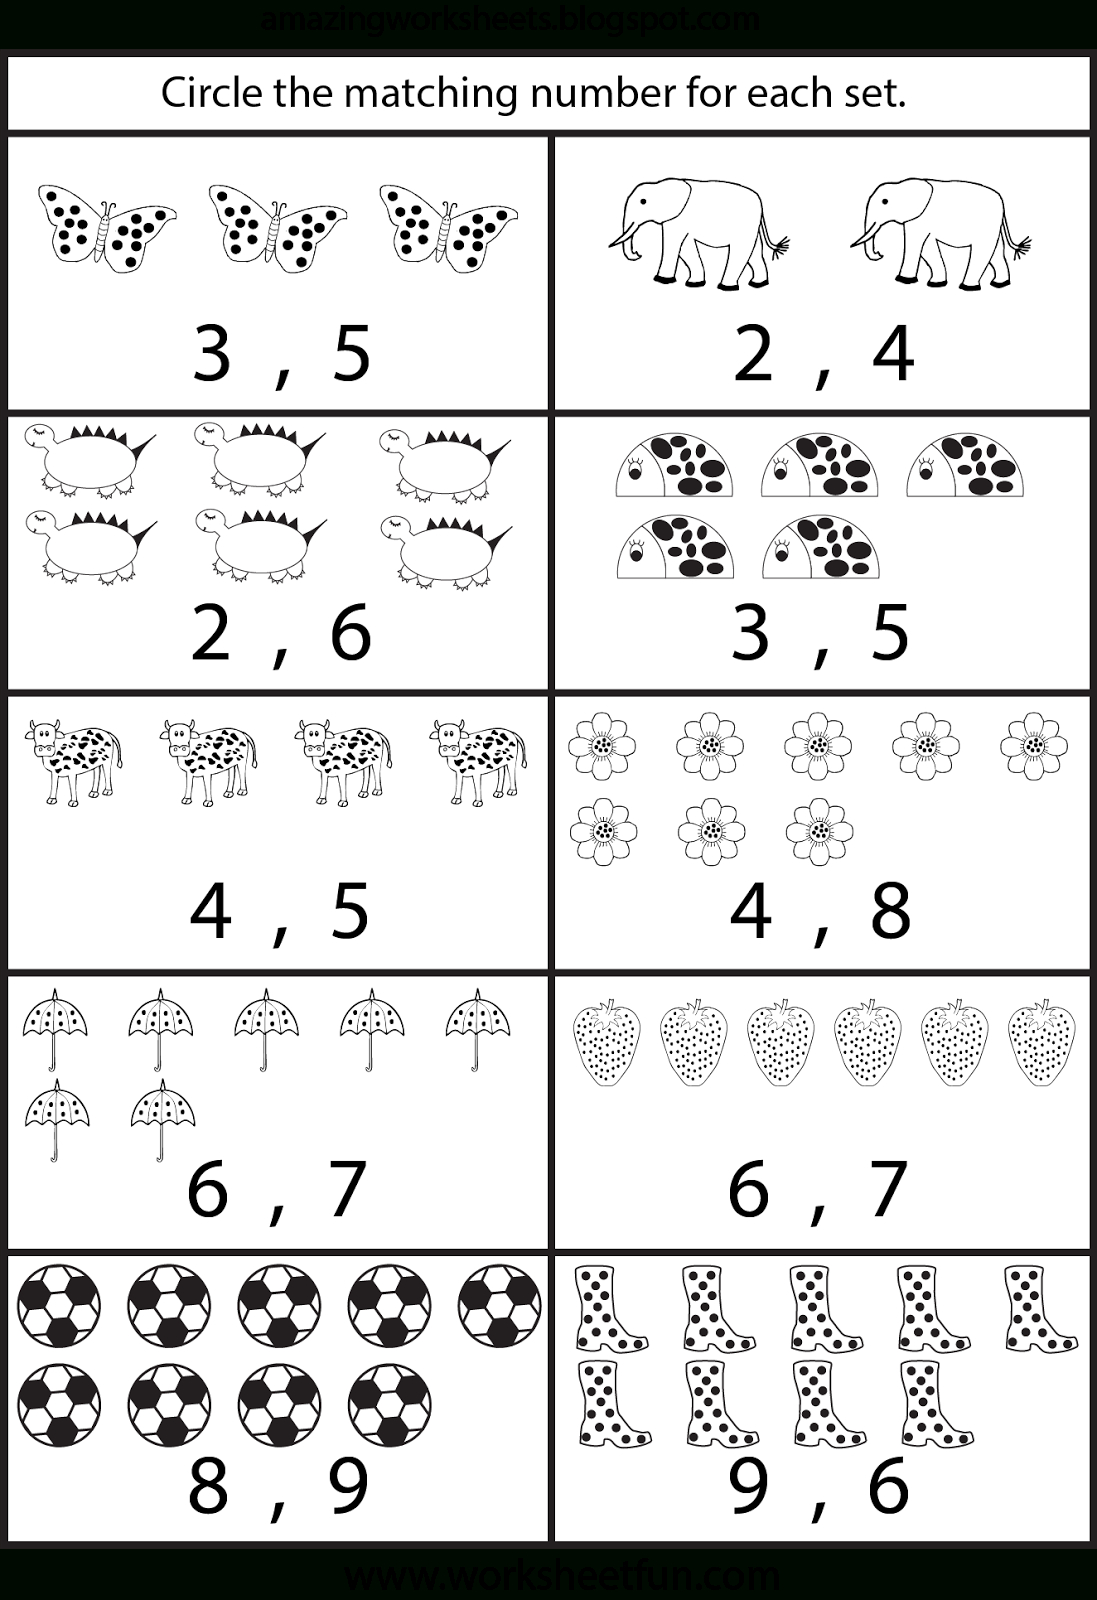 counting-by-2s-worksheets